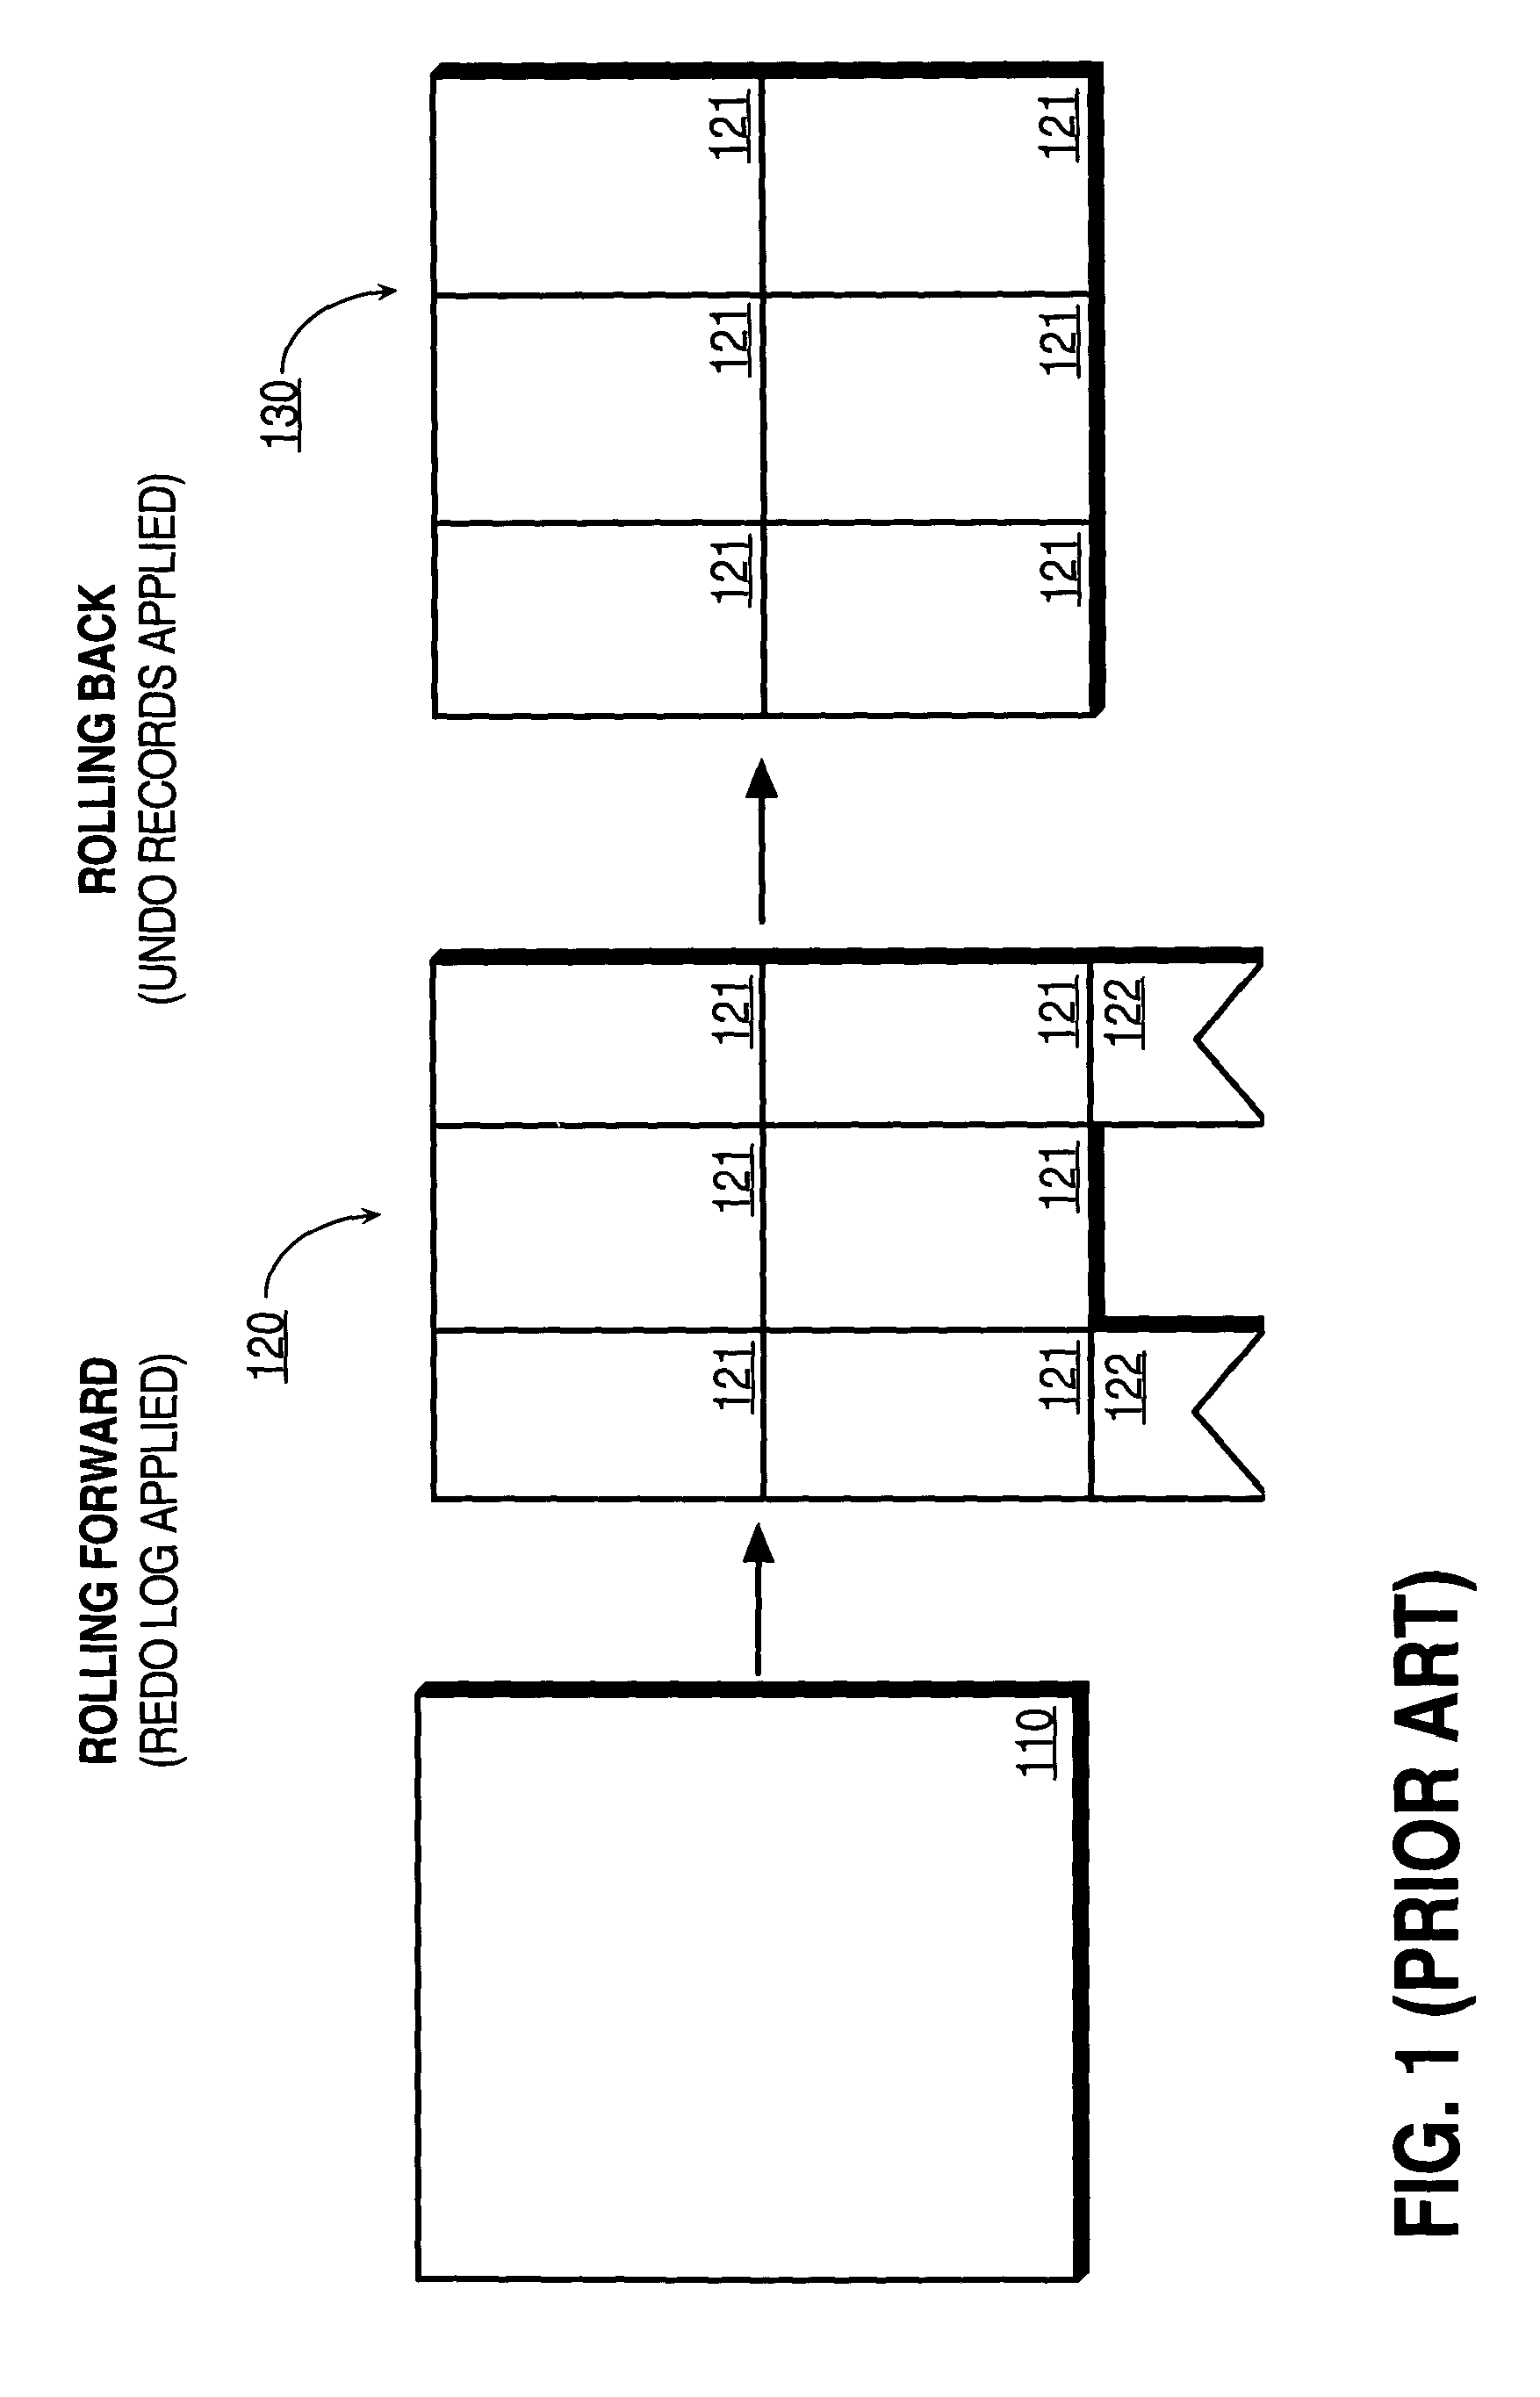 Method and apparatus for making available data that was locked by a dead transaction before rolling back the entire dead transaction